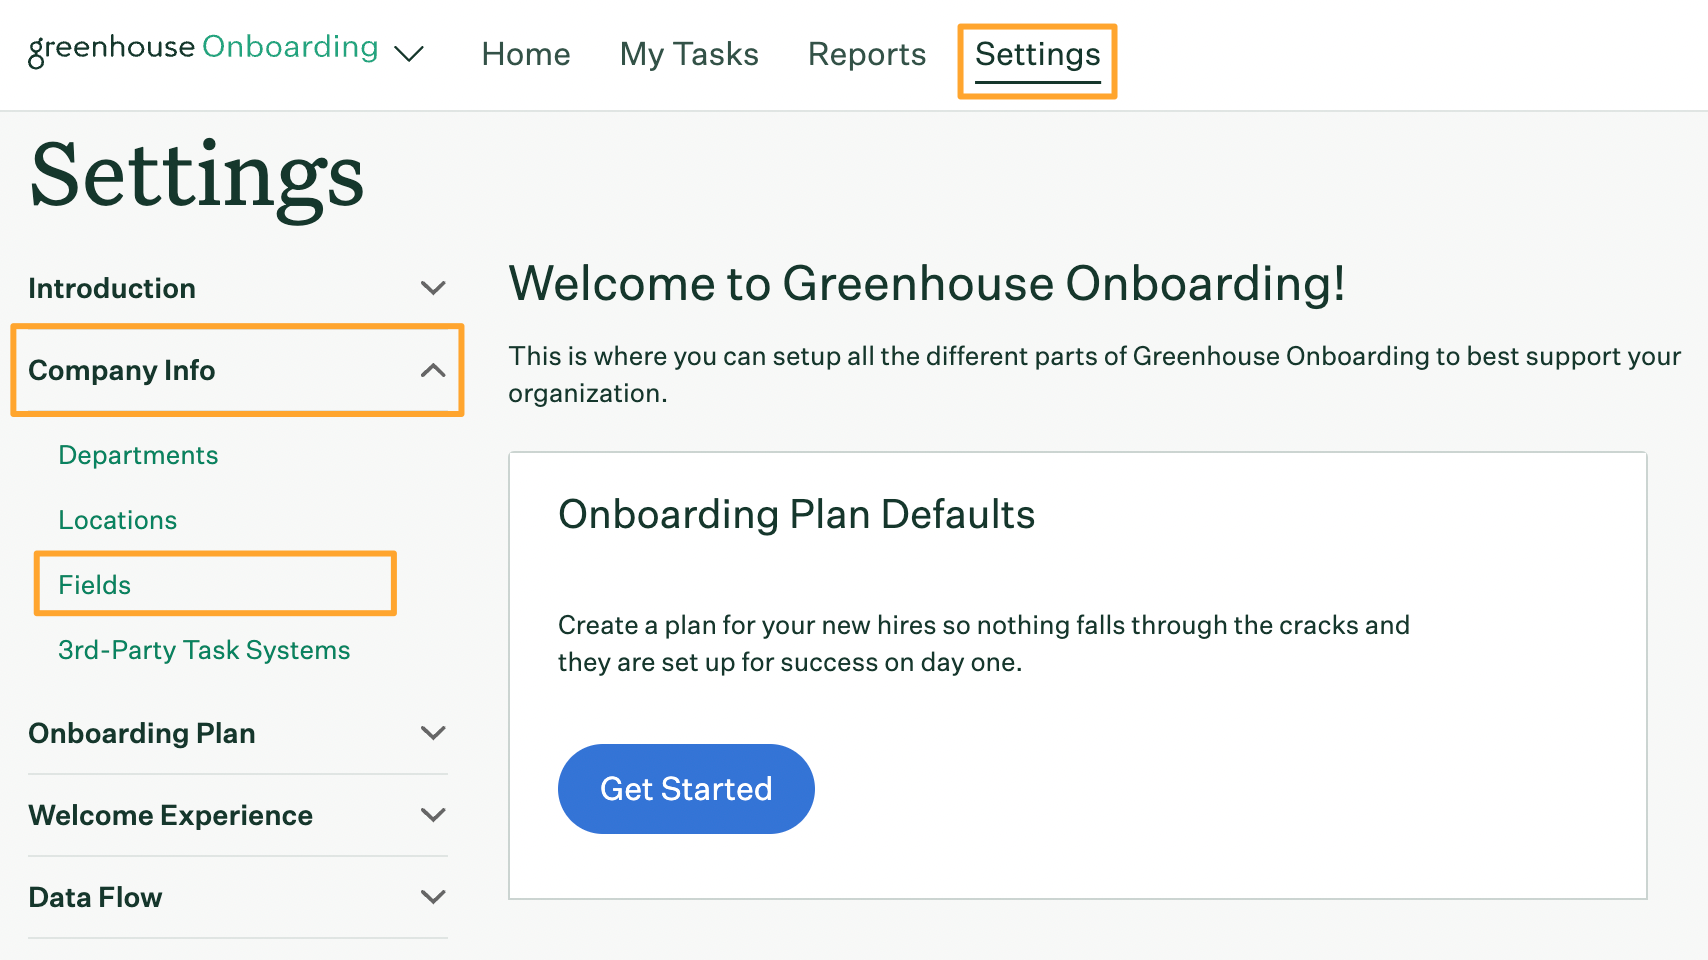 Greenhouse Onboarding Settings page with Company Info and Fields buttons highlighted